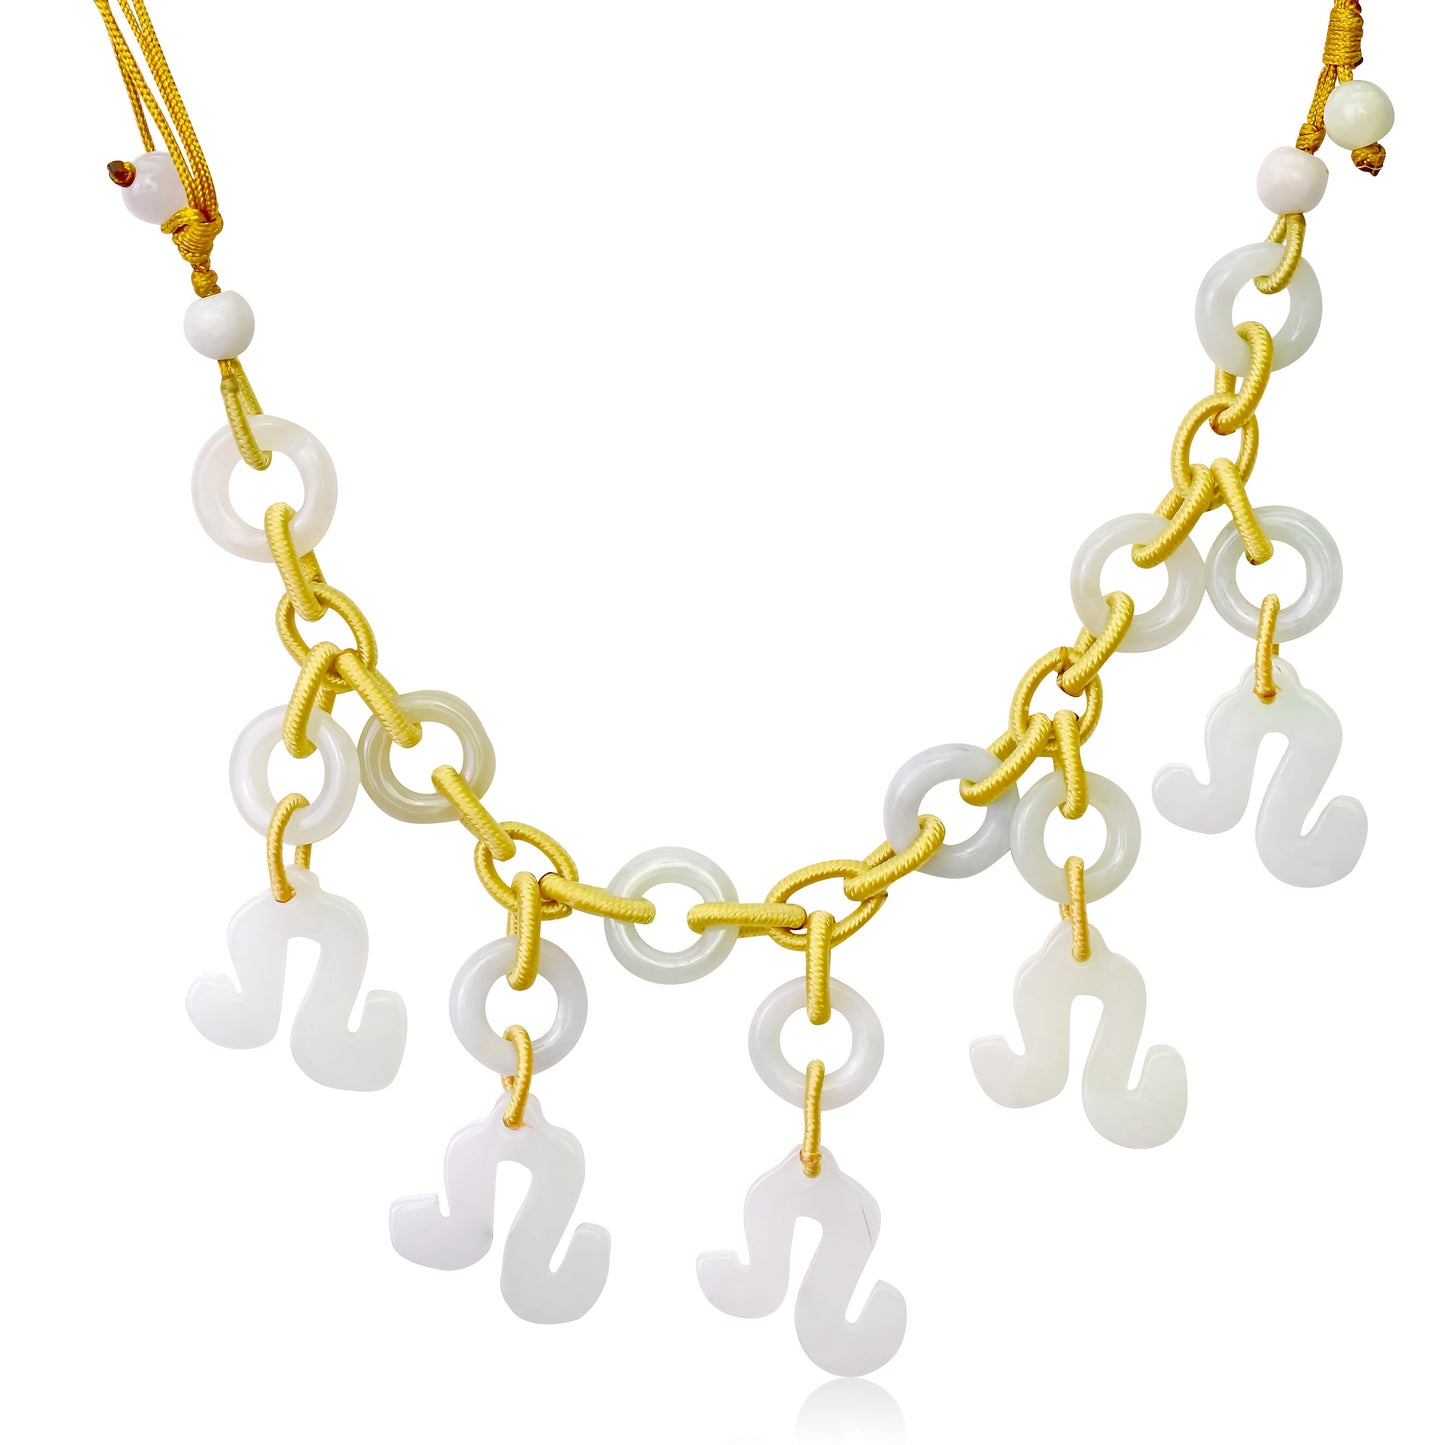 Stand Out with a Uniquely Crafted Leo Handmade Jade Necklace made with Yellow Cord